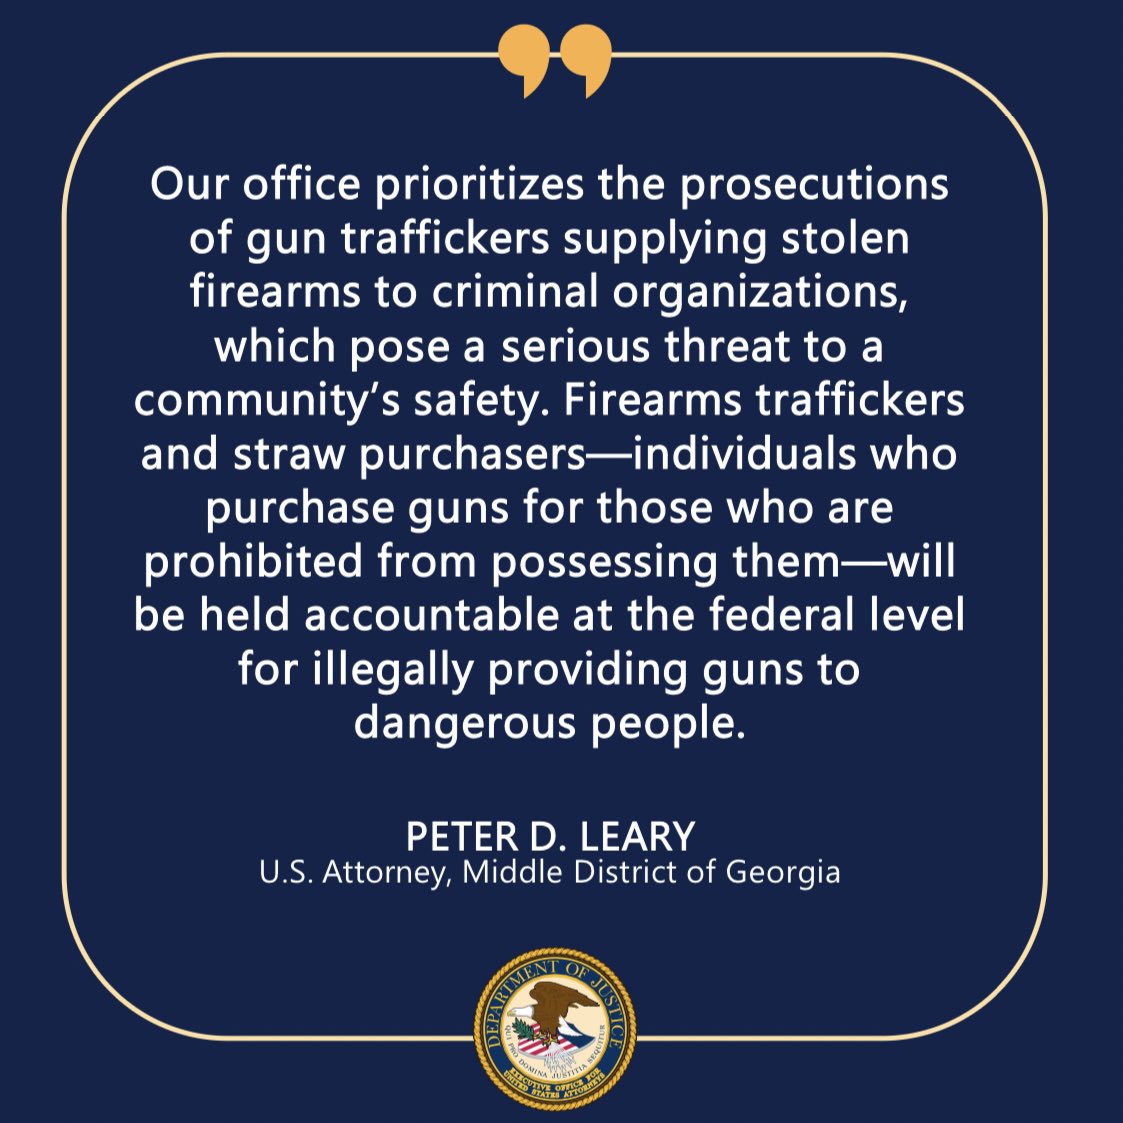 Columbus, Georgia, Men Sentenced to Prison for Helping Supply Stolen Guns to Rival Gangs Full release: justice.gov/usao-mdga/pr/c… This is a @TheJusticeDept #ProjectSafeNeighborhoods case. @ATFAtlanta @ATFHQ @CPDGA @PhenixCityPD @USAttorneys